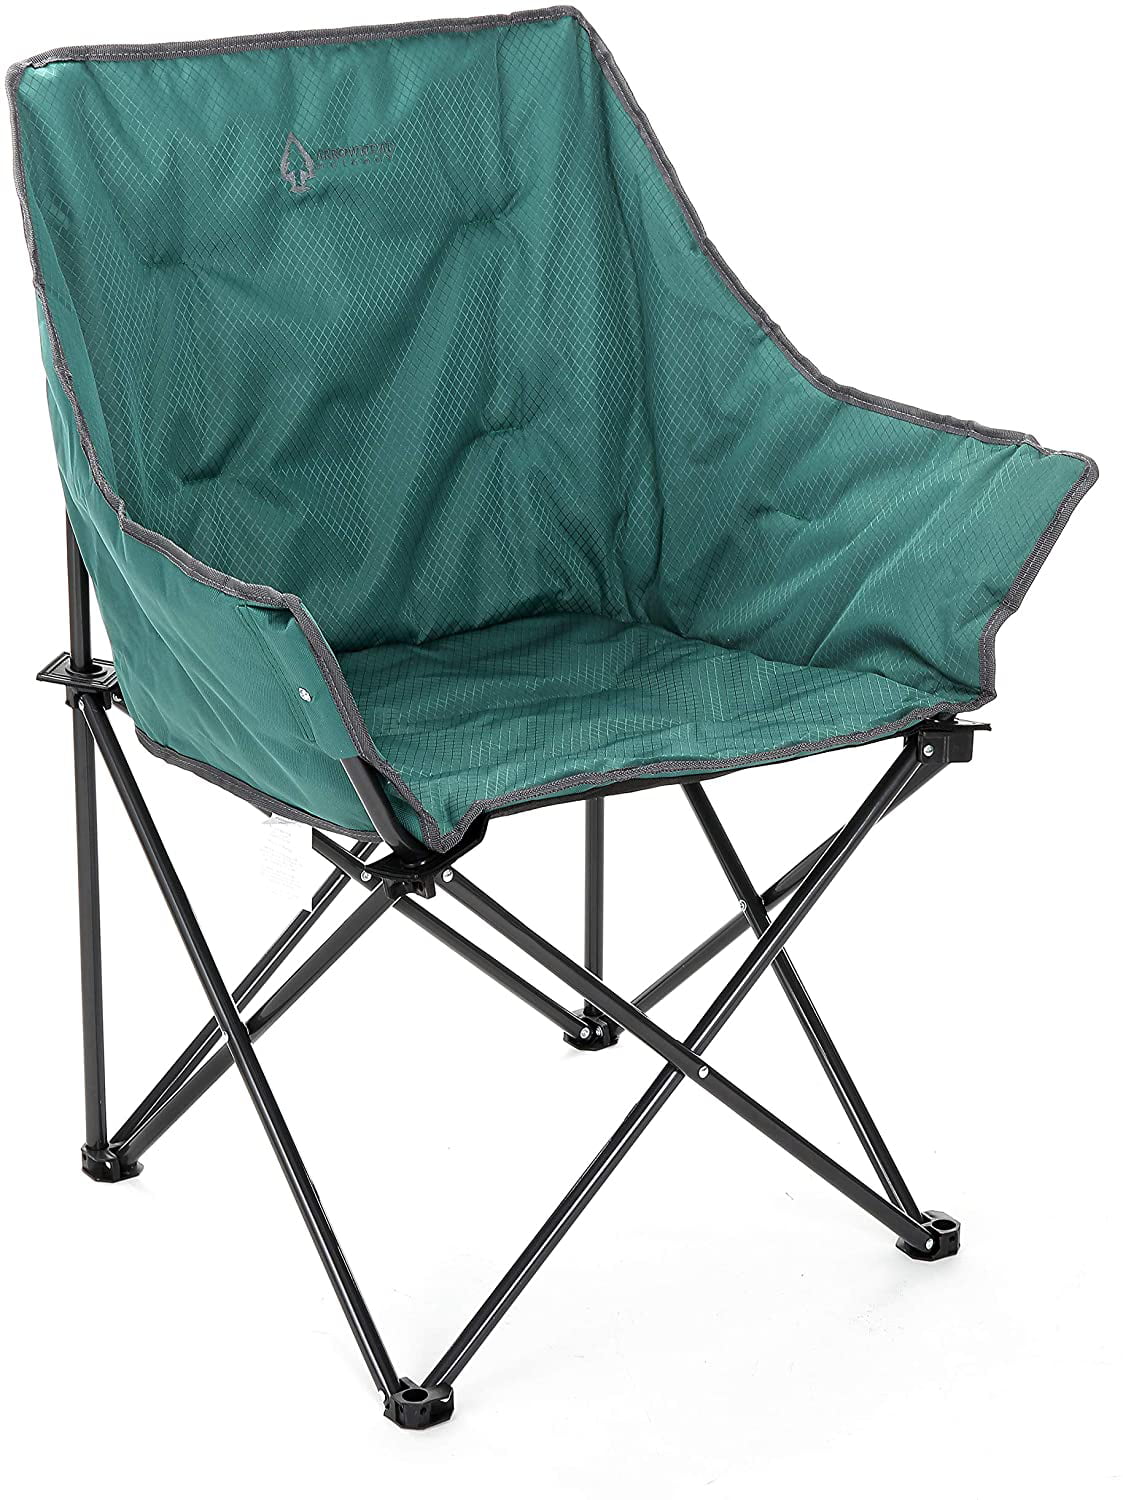 BLACK METAL FOLDING POCKET CHAIR INDOOR OUTDOOR USE UP TO 250LBS BEACH CAMP SEAT